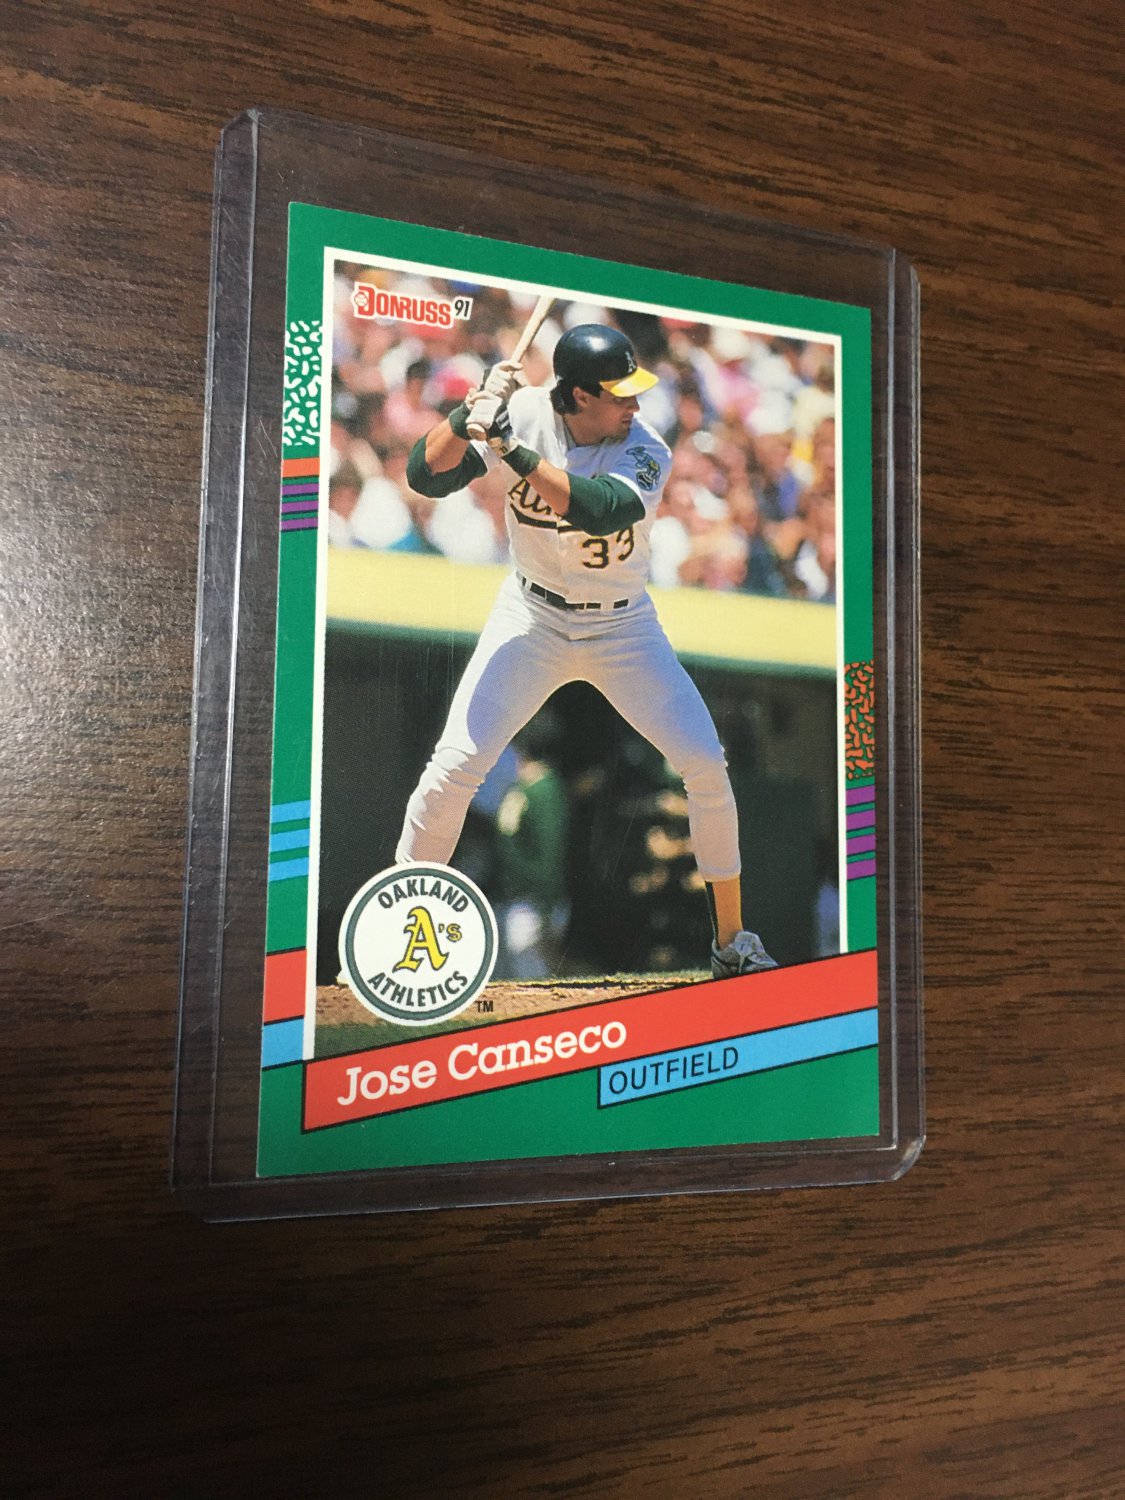 1991 Donruss Jose Canseco #536